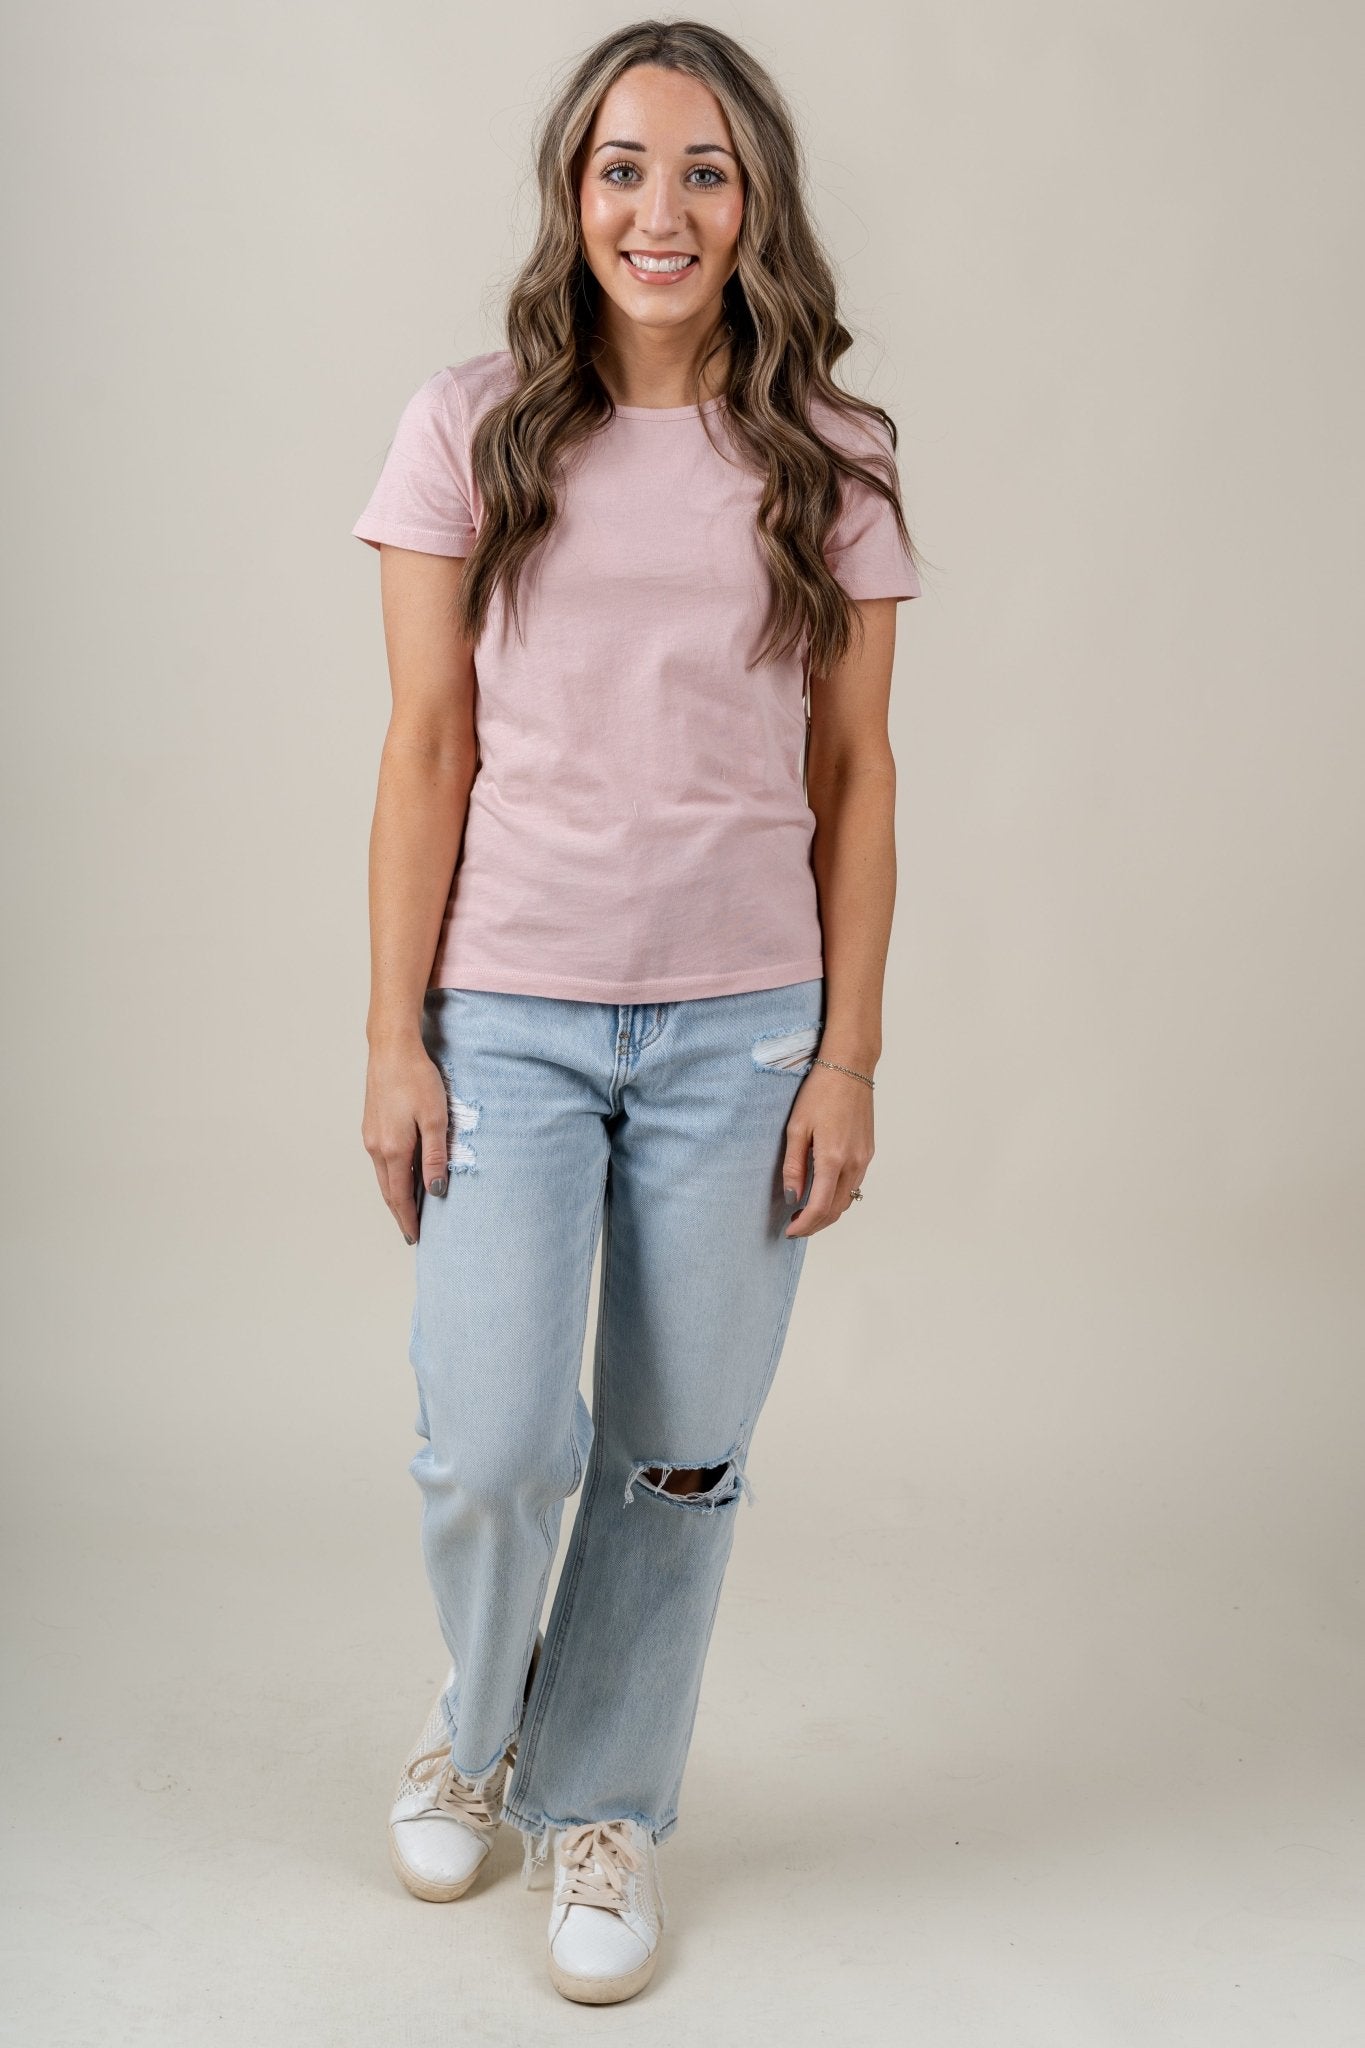 Z Supply classic short sleeve tee blush mood - Z Supply Top - Z Supply Clothing at Lush Fashion Lounge Trendy Boutique Oklahoma City